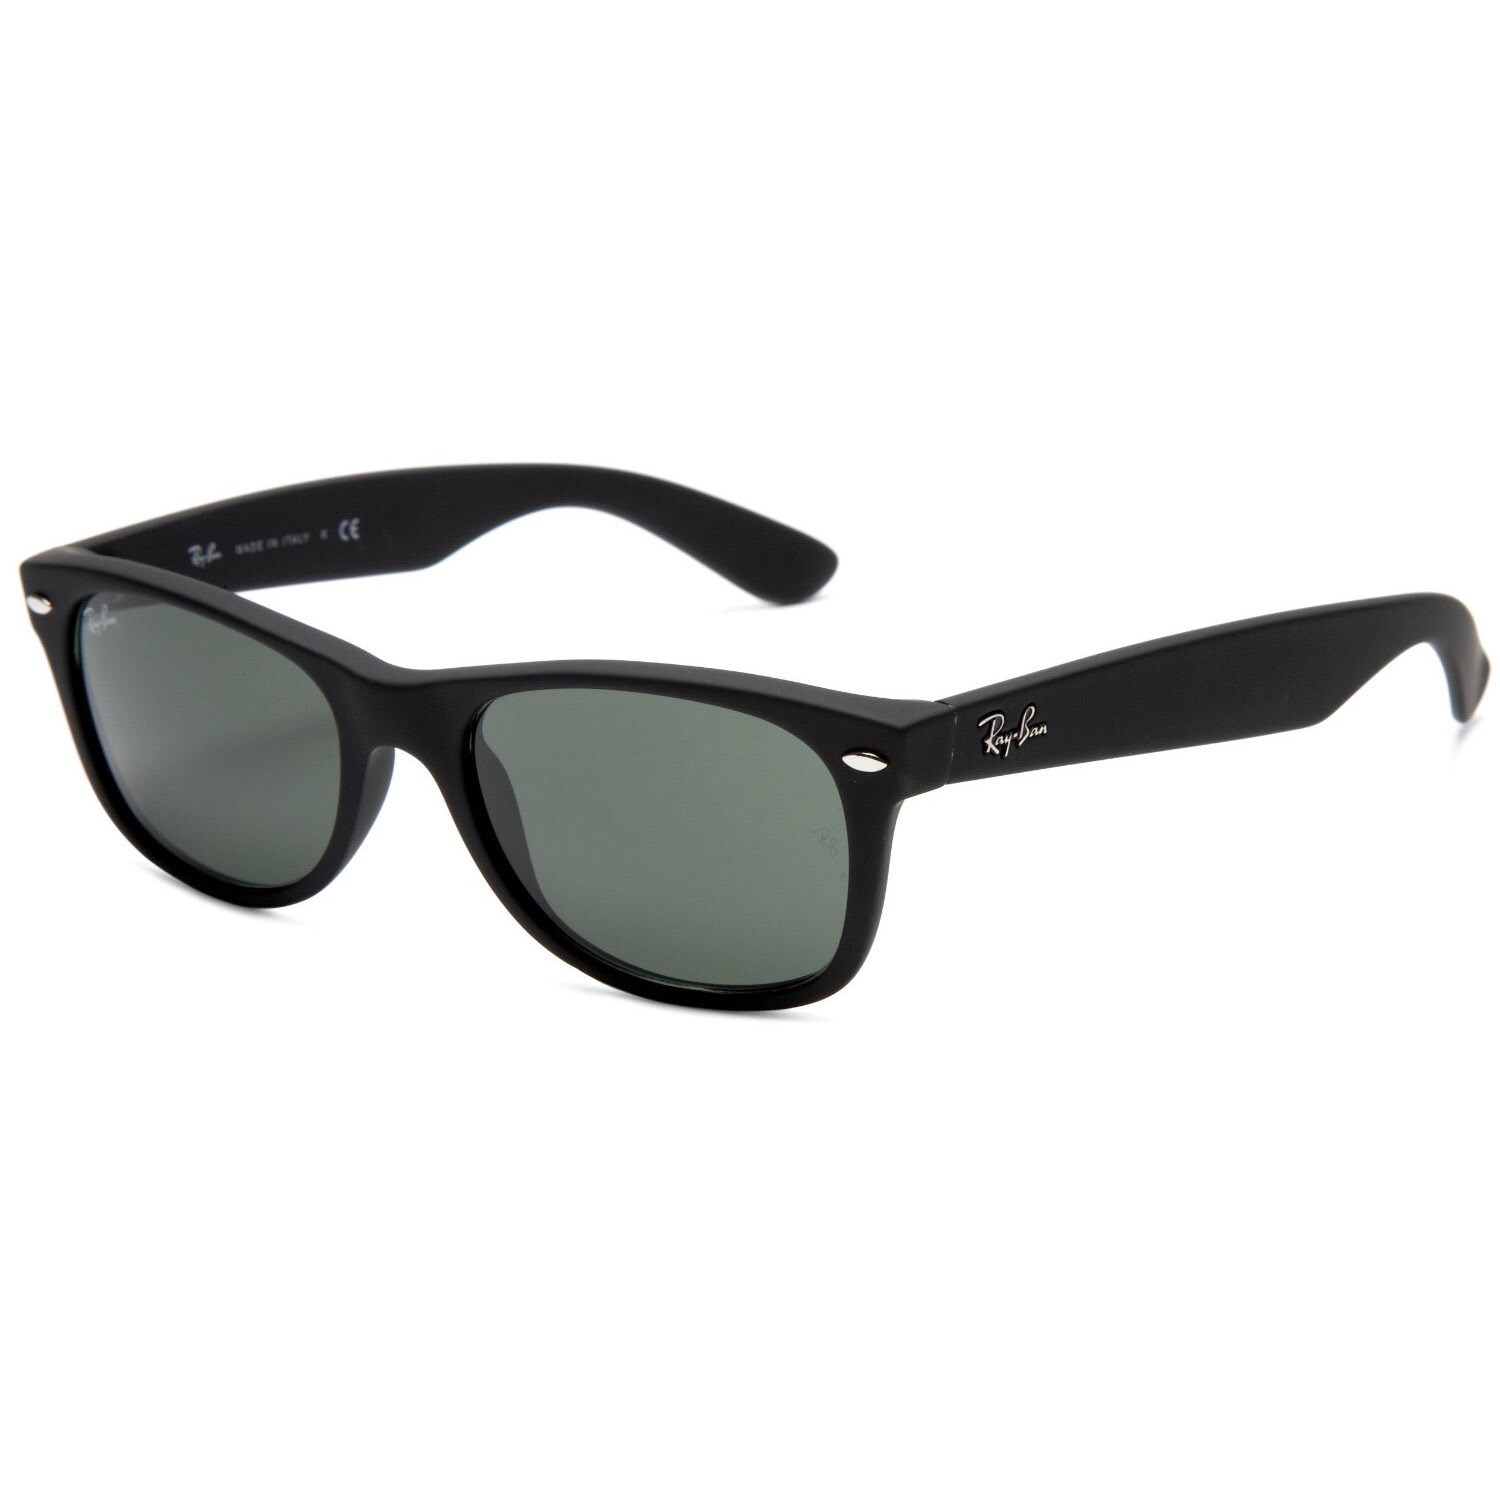 Ray-Ban Menundefineds undefinedRB2132undefined New Wayfarer Sunglasses  Black Rubber, Green Lens - 52 mm (As Is Item) - Overstock - 9833917